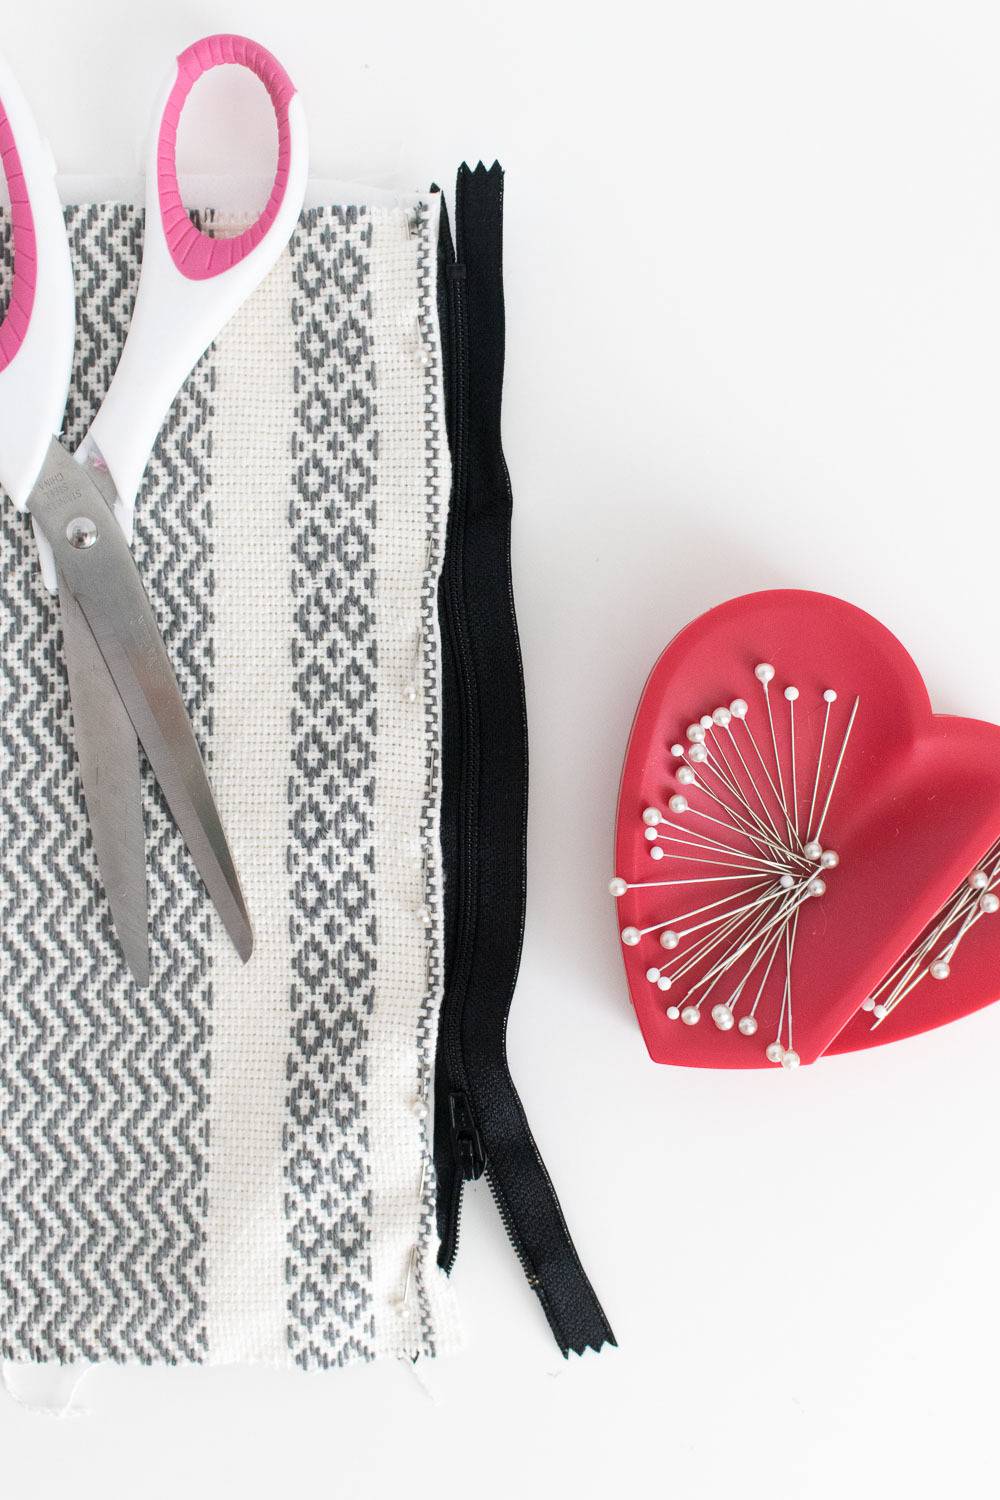 A pair of pink and white scissors, a grey and white piece of cloth, a black strip of ribbon and a red heart pin holder.